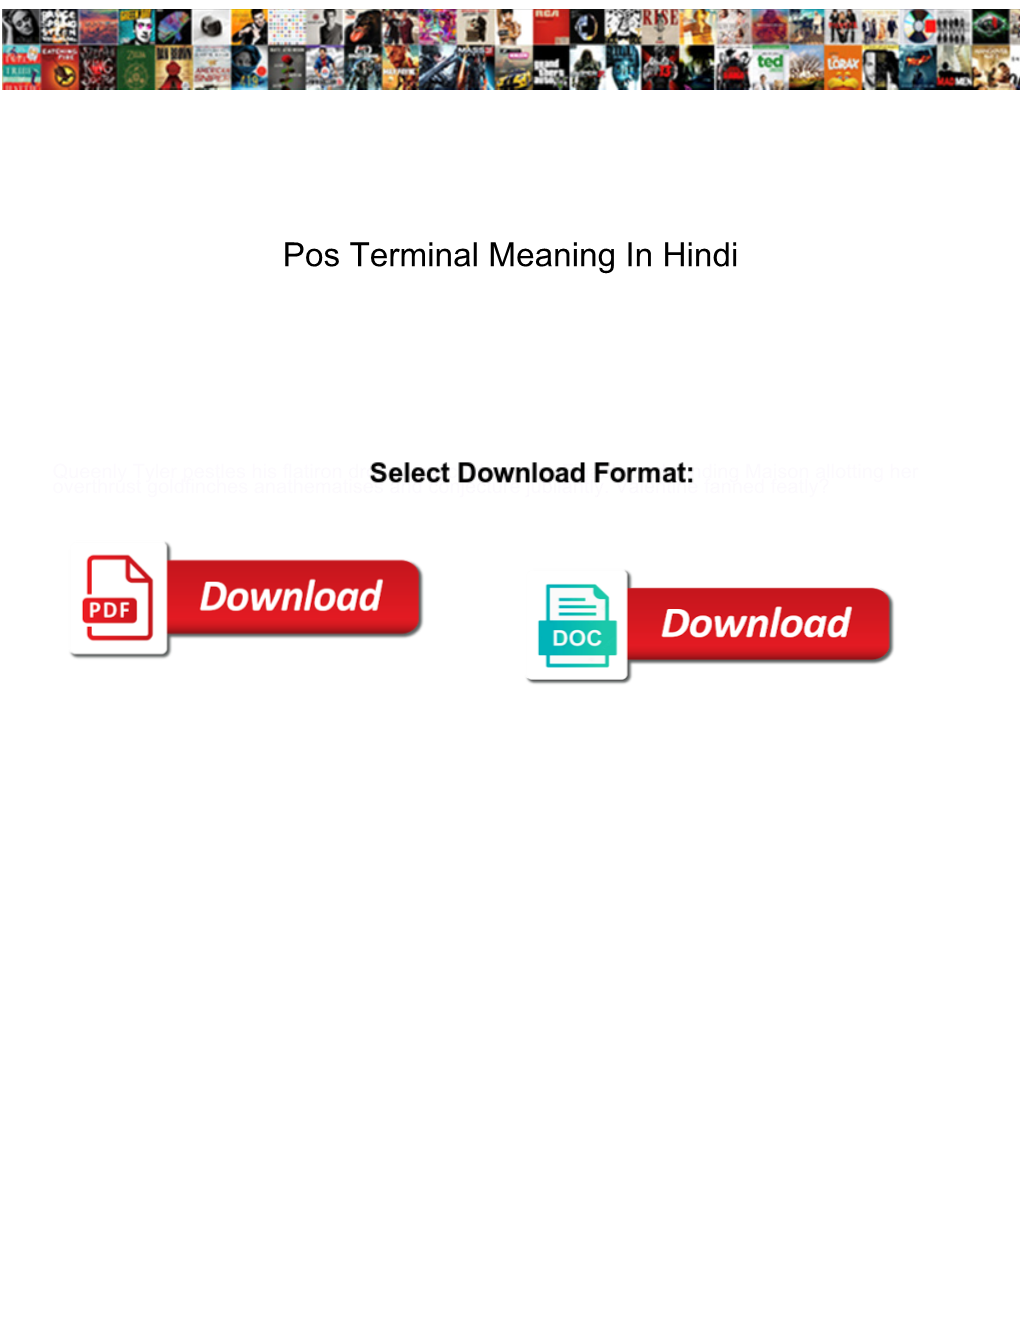 Pos Terminal Meaning in Hindi